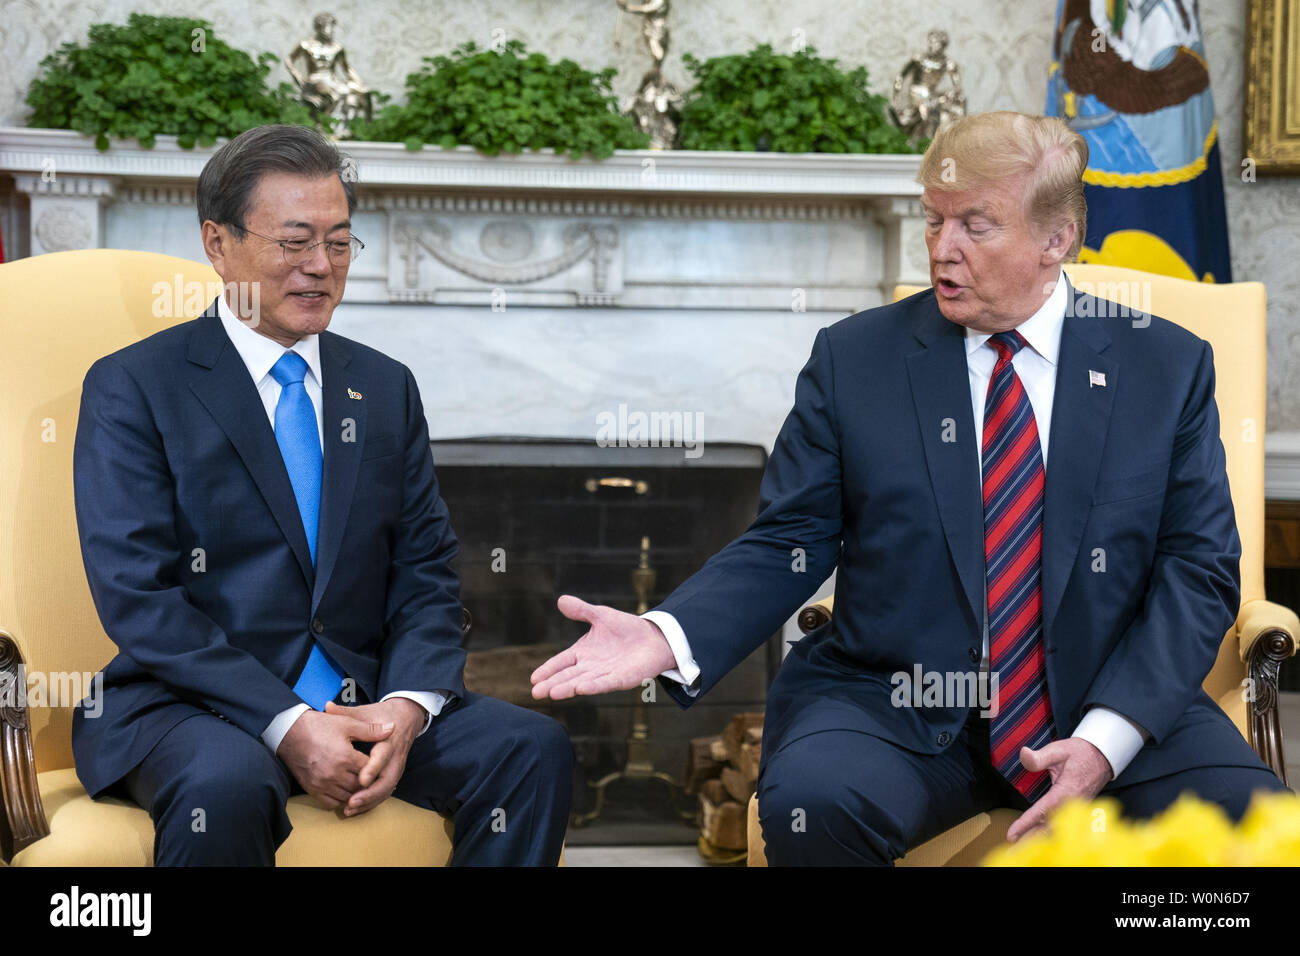 US President Donald J. Trump (R) welcomes South Korean President Moon Jae-in (L) to the Oval Office of the White House White House in Washington on April 11, 2019. President Moon is expected to ask President Trump to reduce sanctions on North Korea in an attempt to jump start nuclear negotiations between North Korea and the US.  Photo by Jim Lo Scalzo/UPI Stock Photo